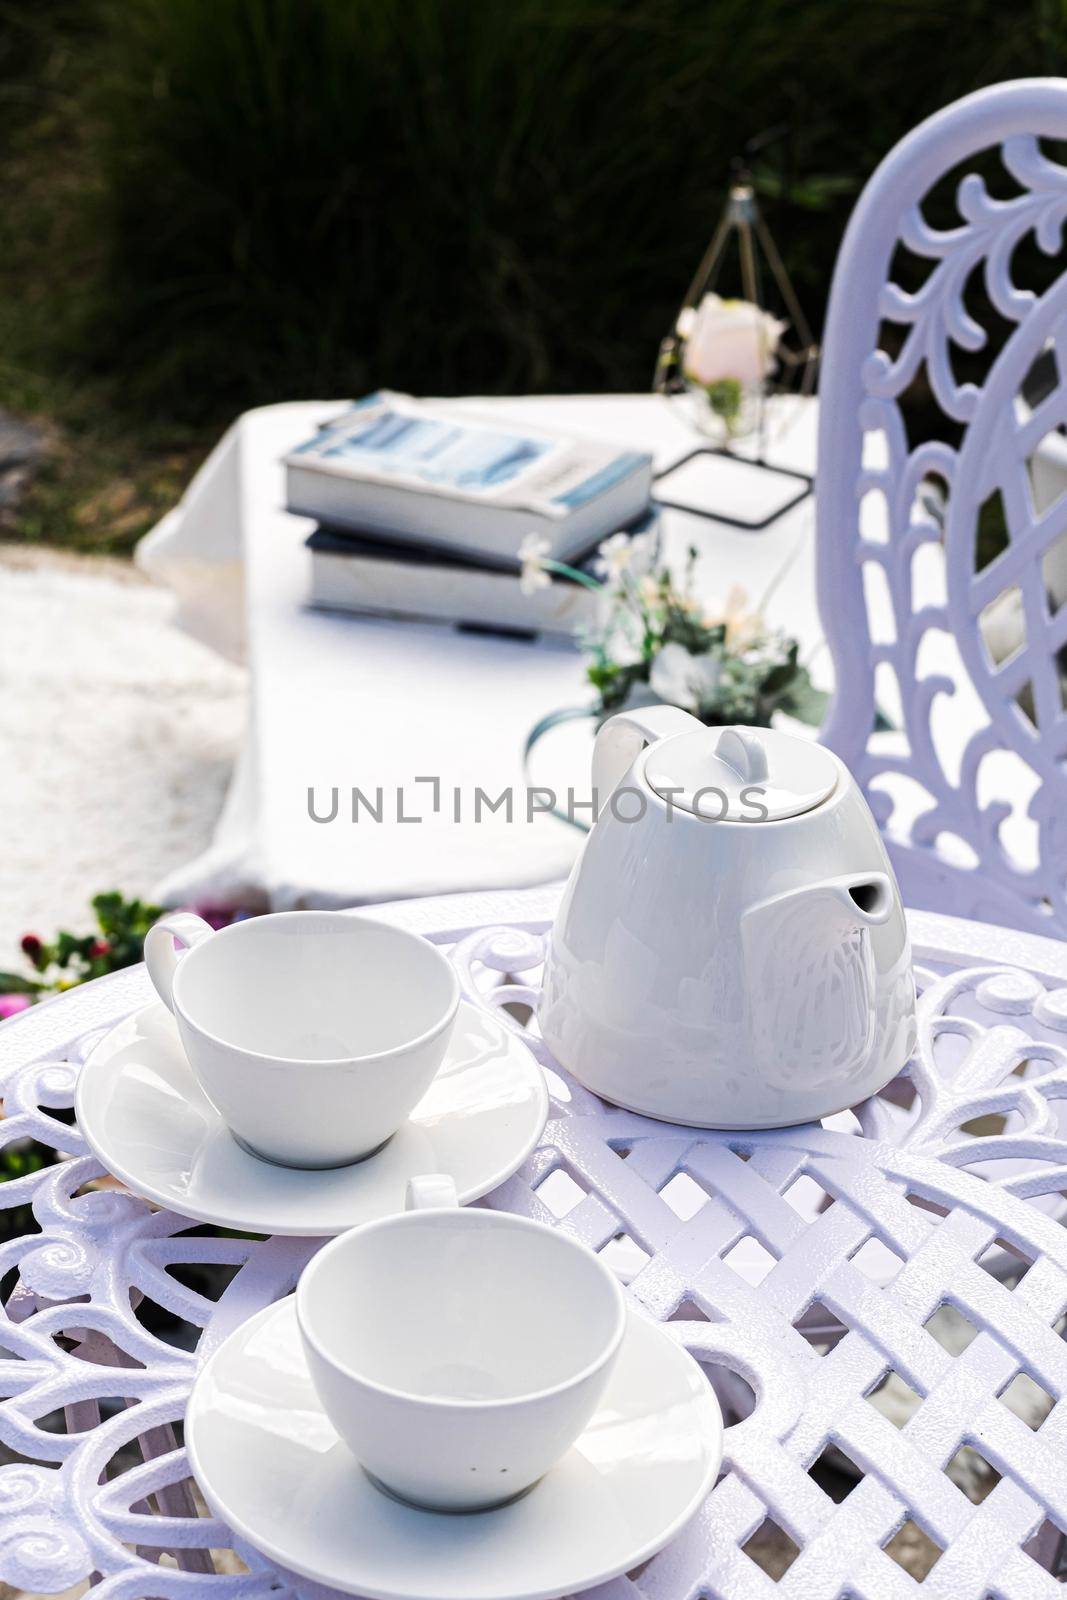 inspiration picnic outdoors, with the dinner table and Picnic setting